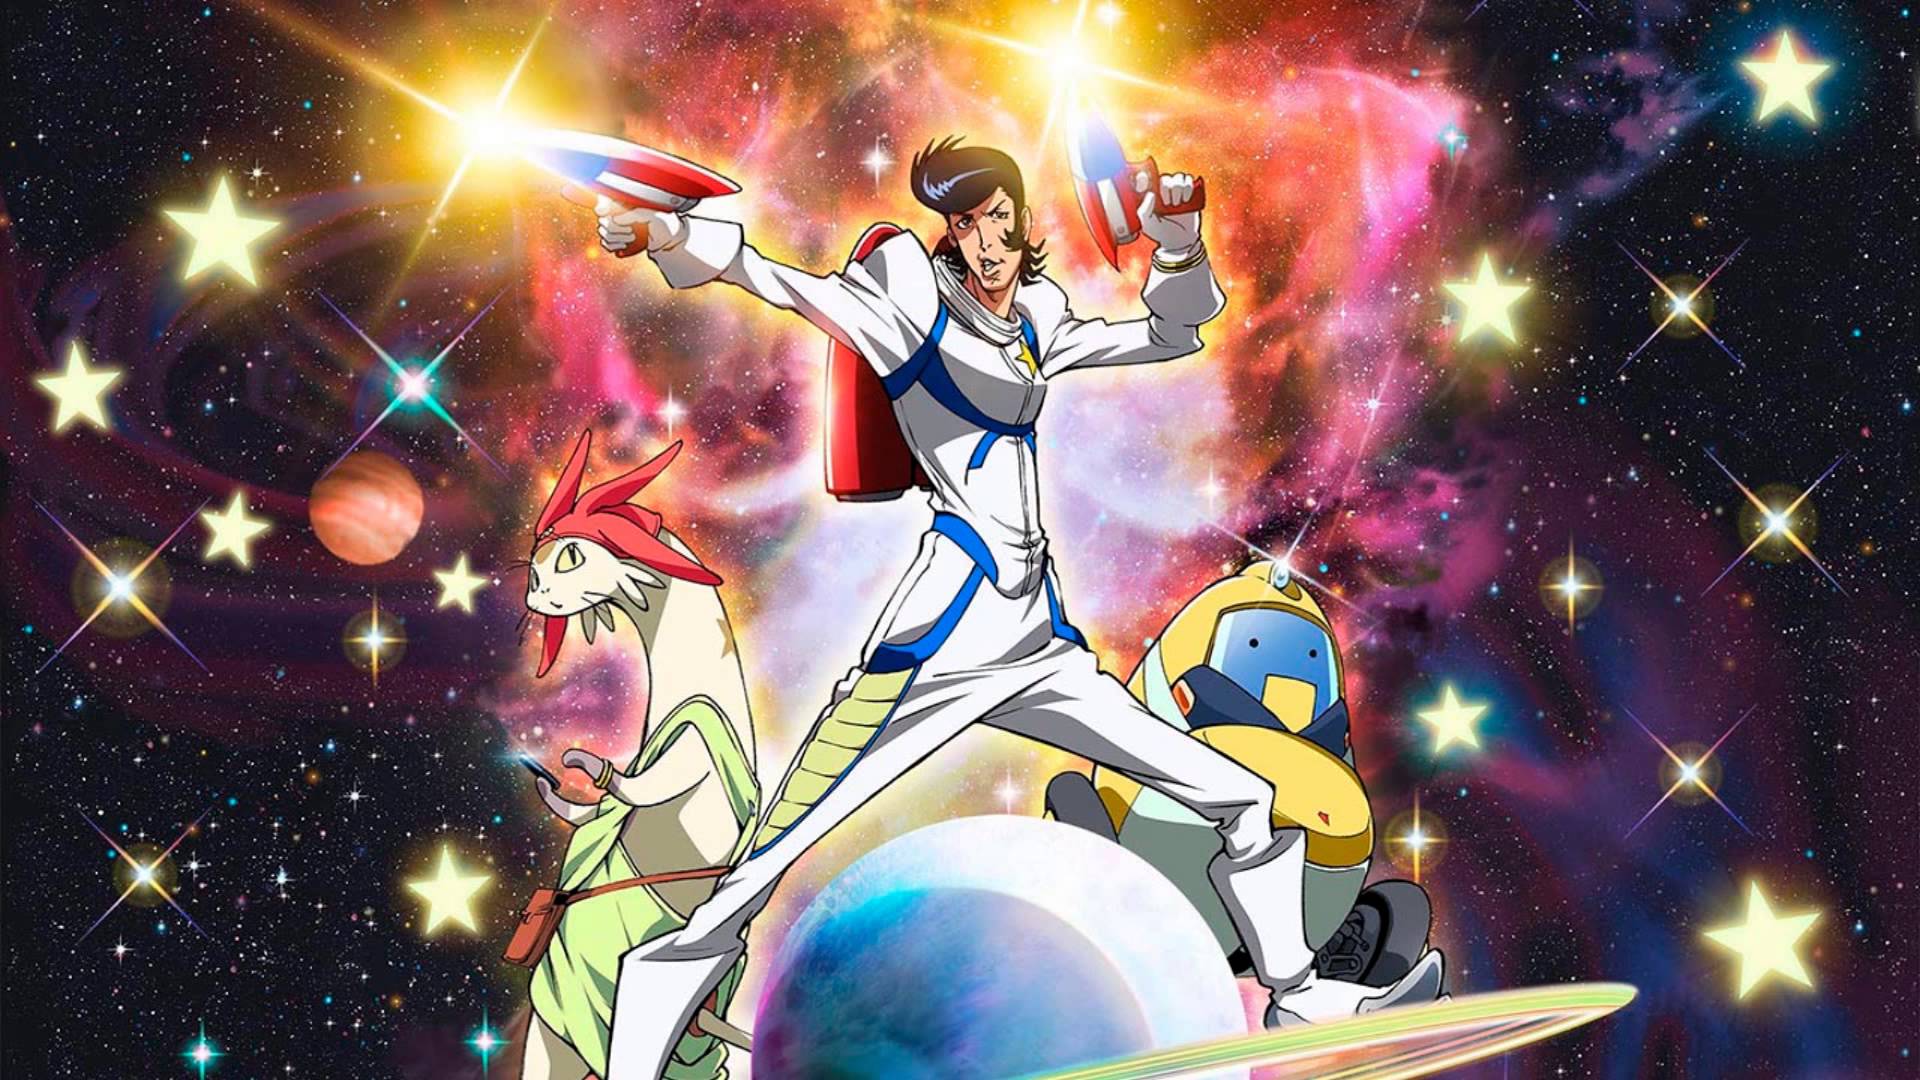 Space Dandy Season 1 2014  AFA Animation For Adults  Animation News  Reviews Articles Podcasts and More